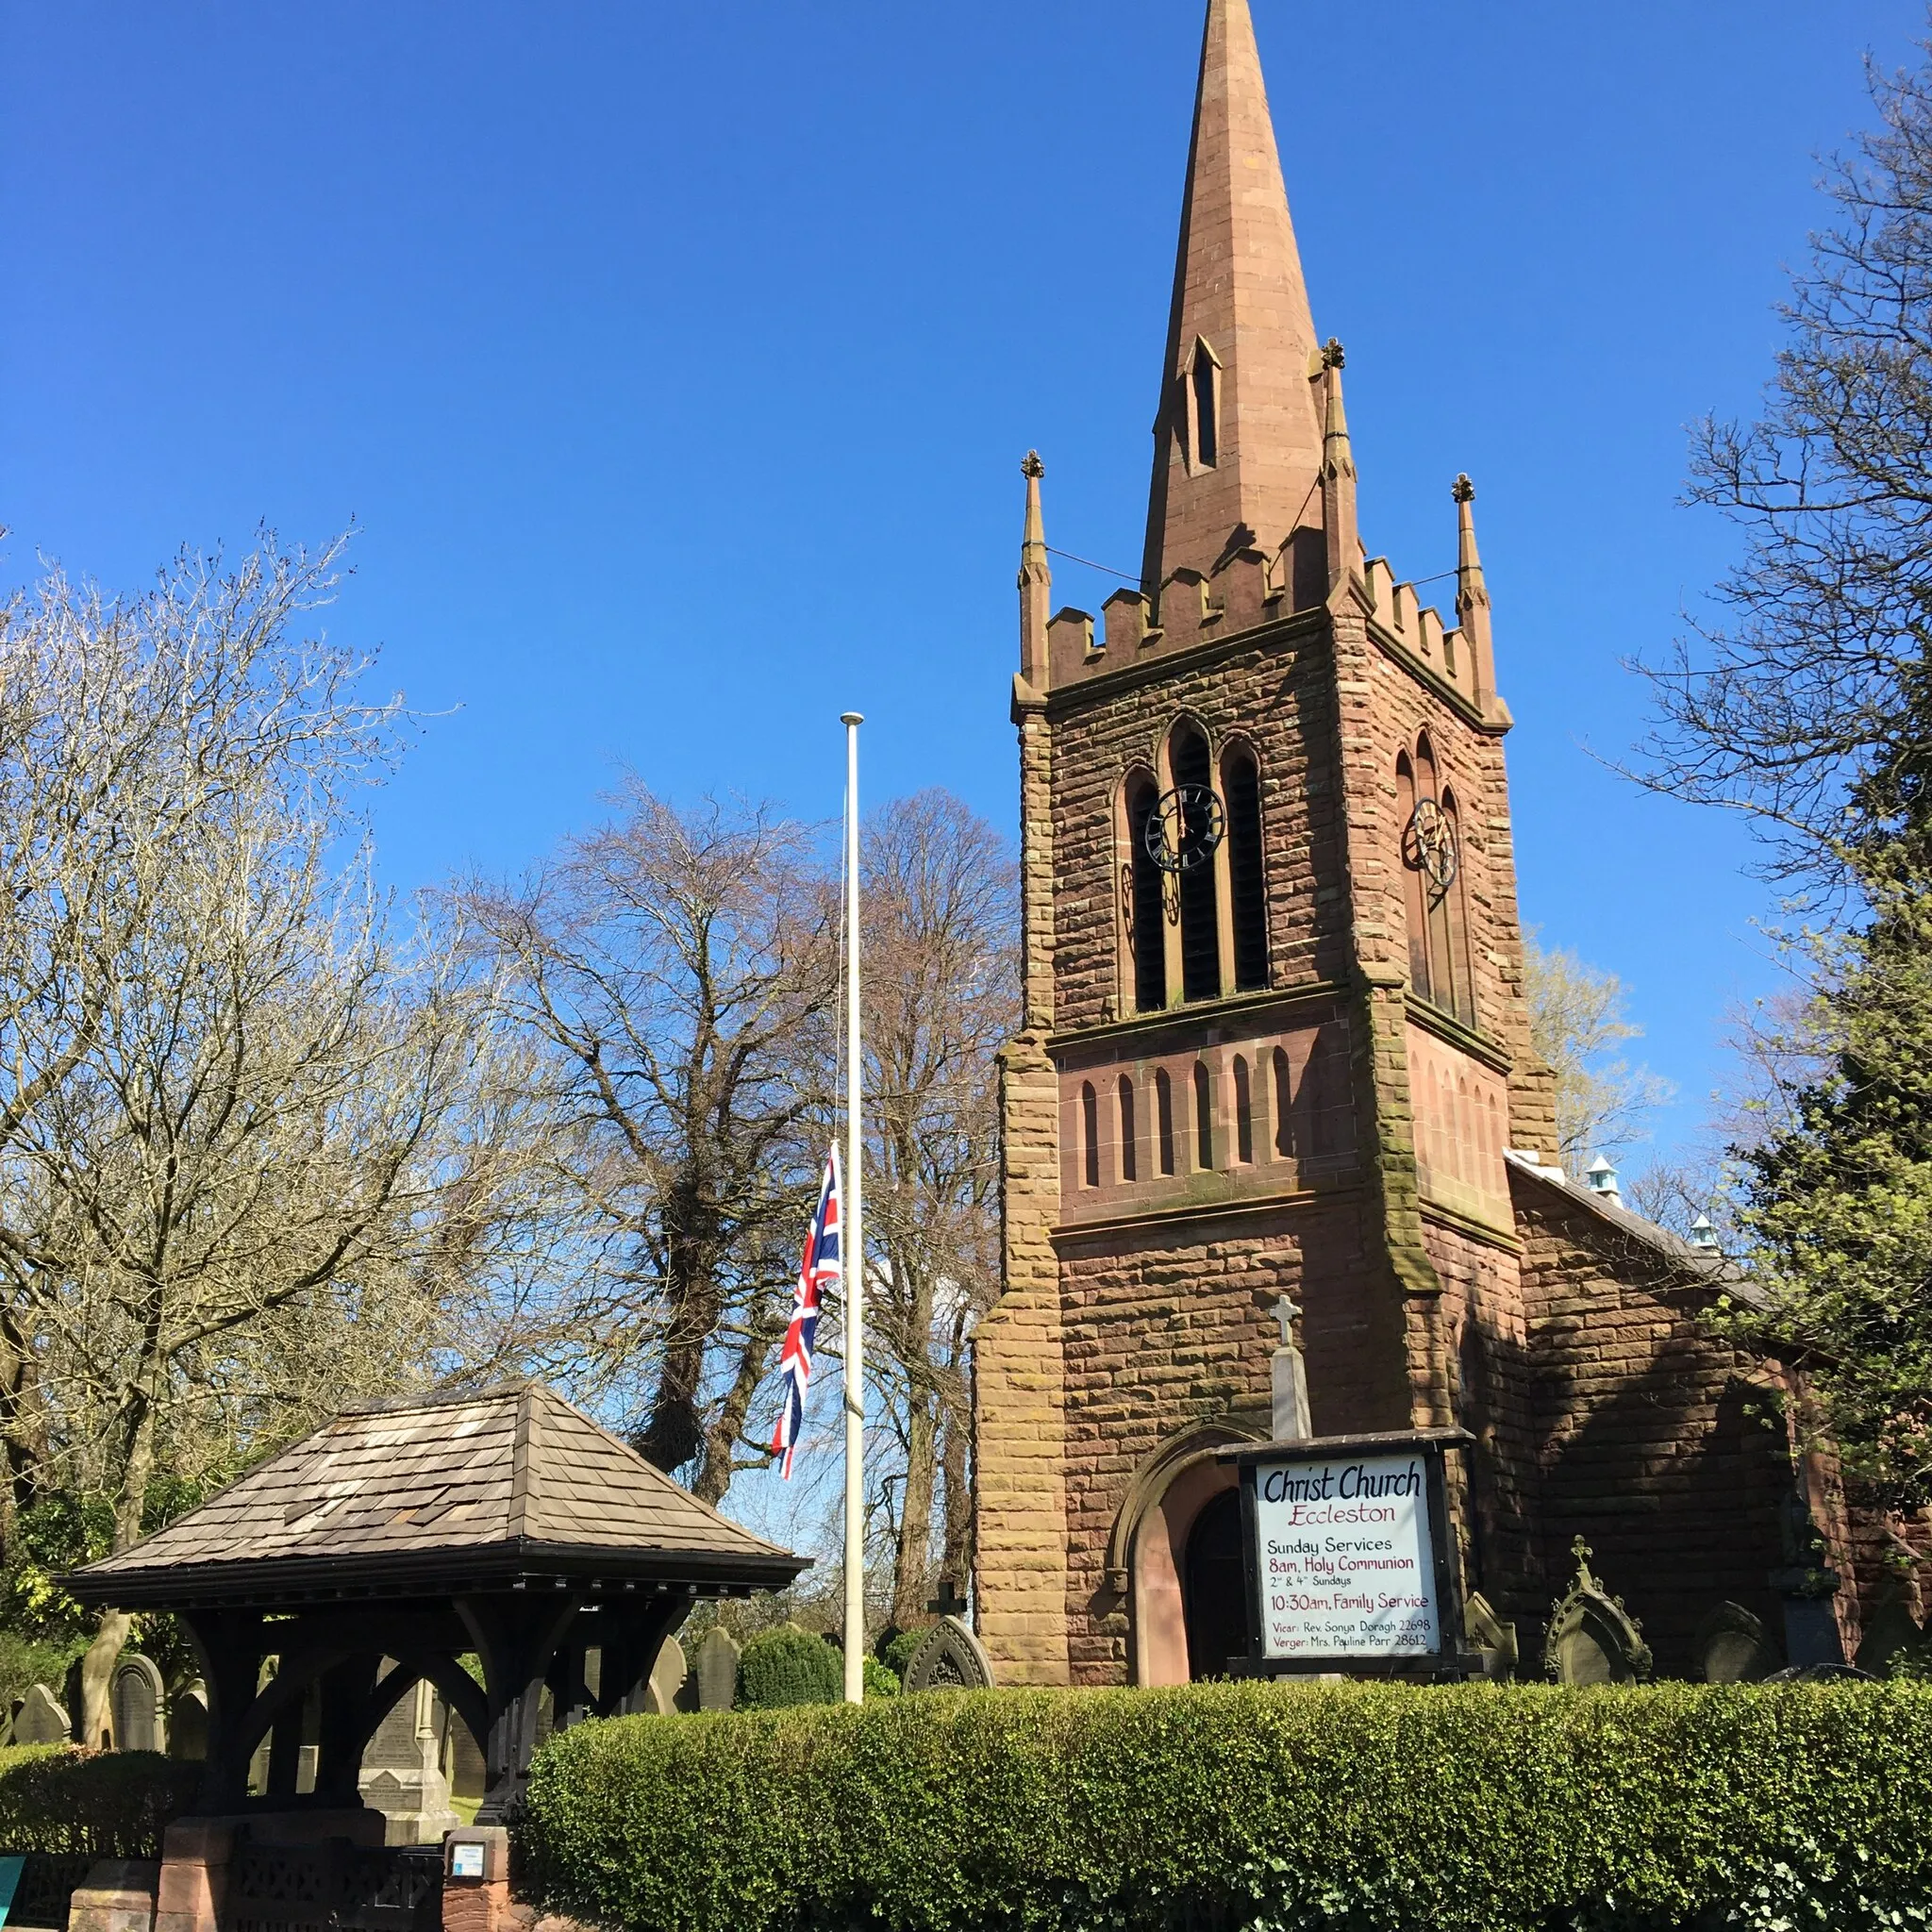 Photo showing: Christ Church in the village of Eccleston near St Helens, pictured with union flag flying at half-mast following the death of Prince Philip, husband of Queen Elizabeth II.